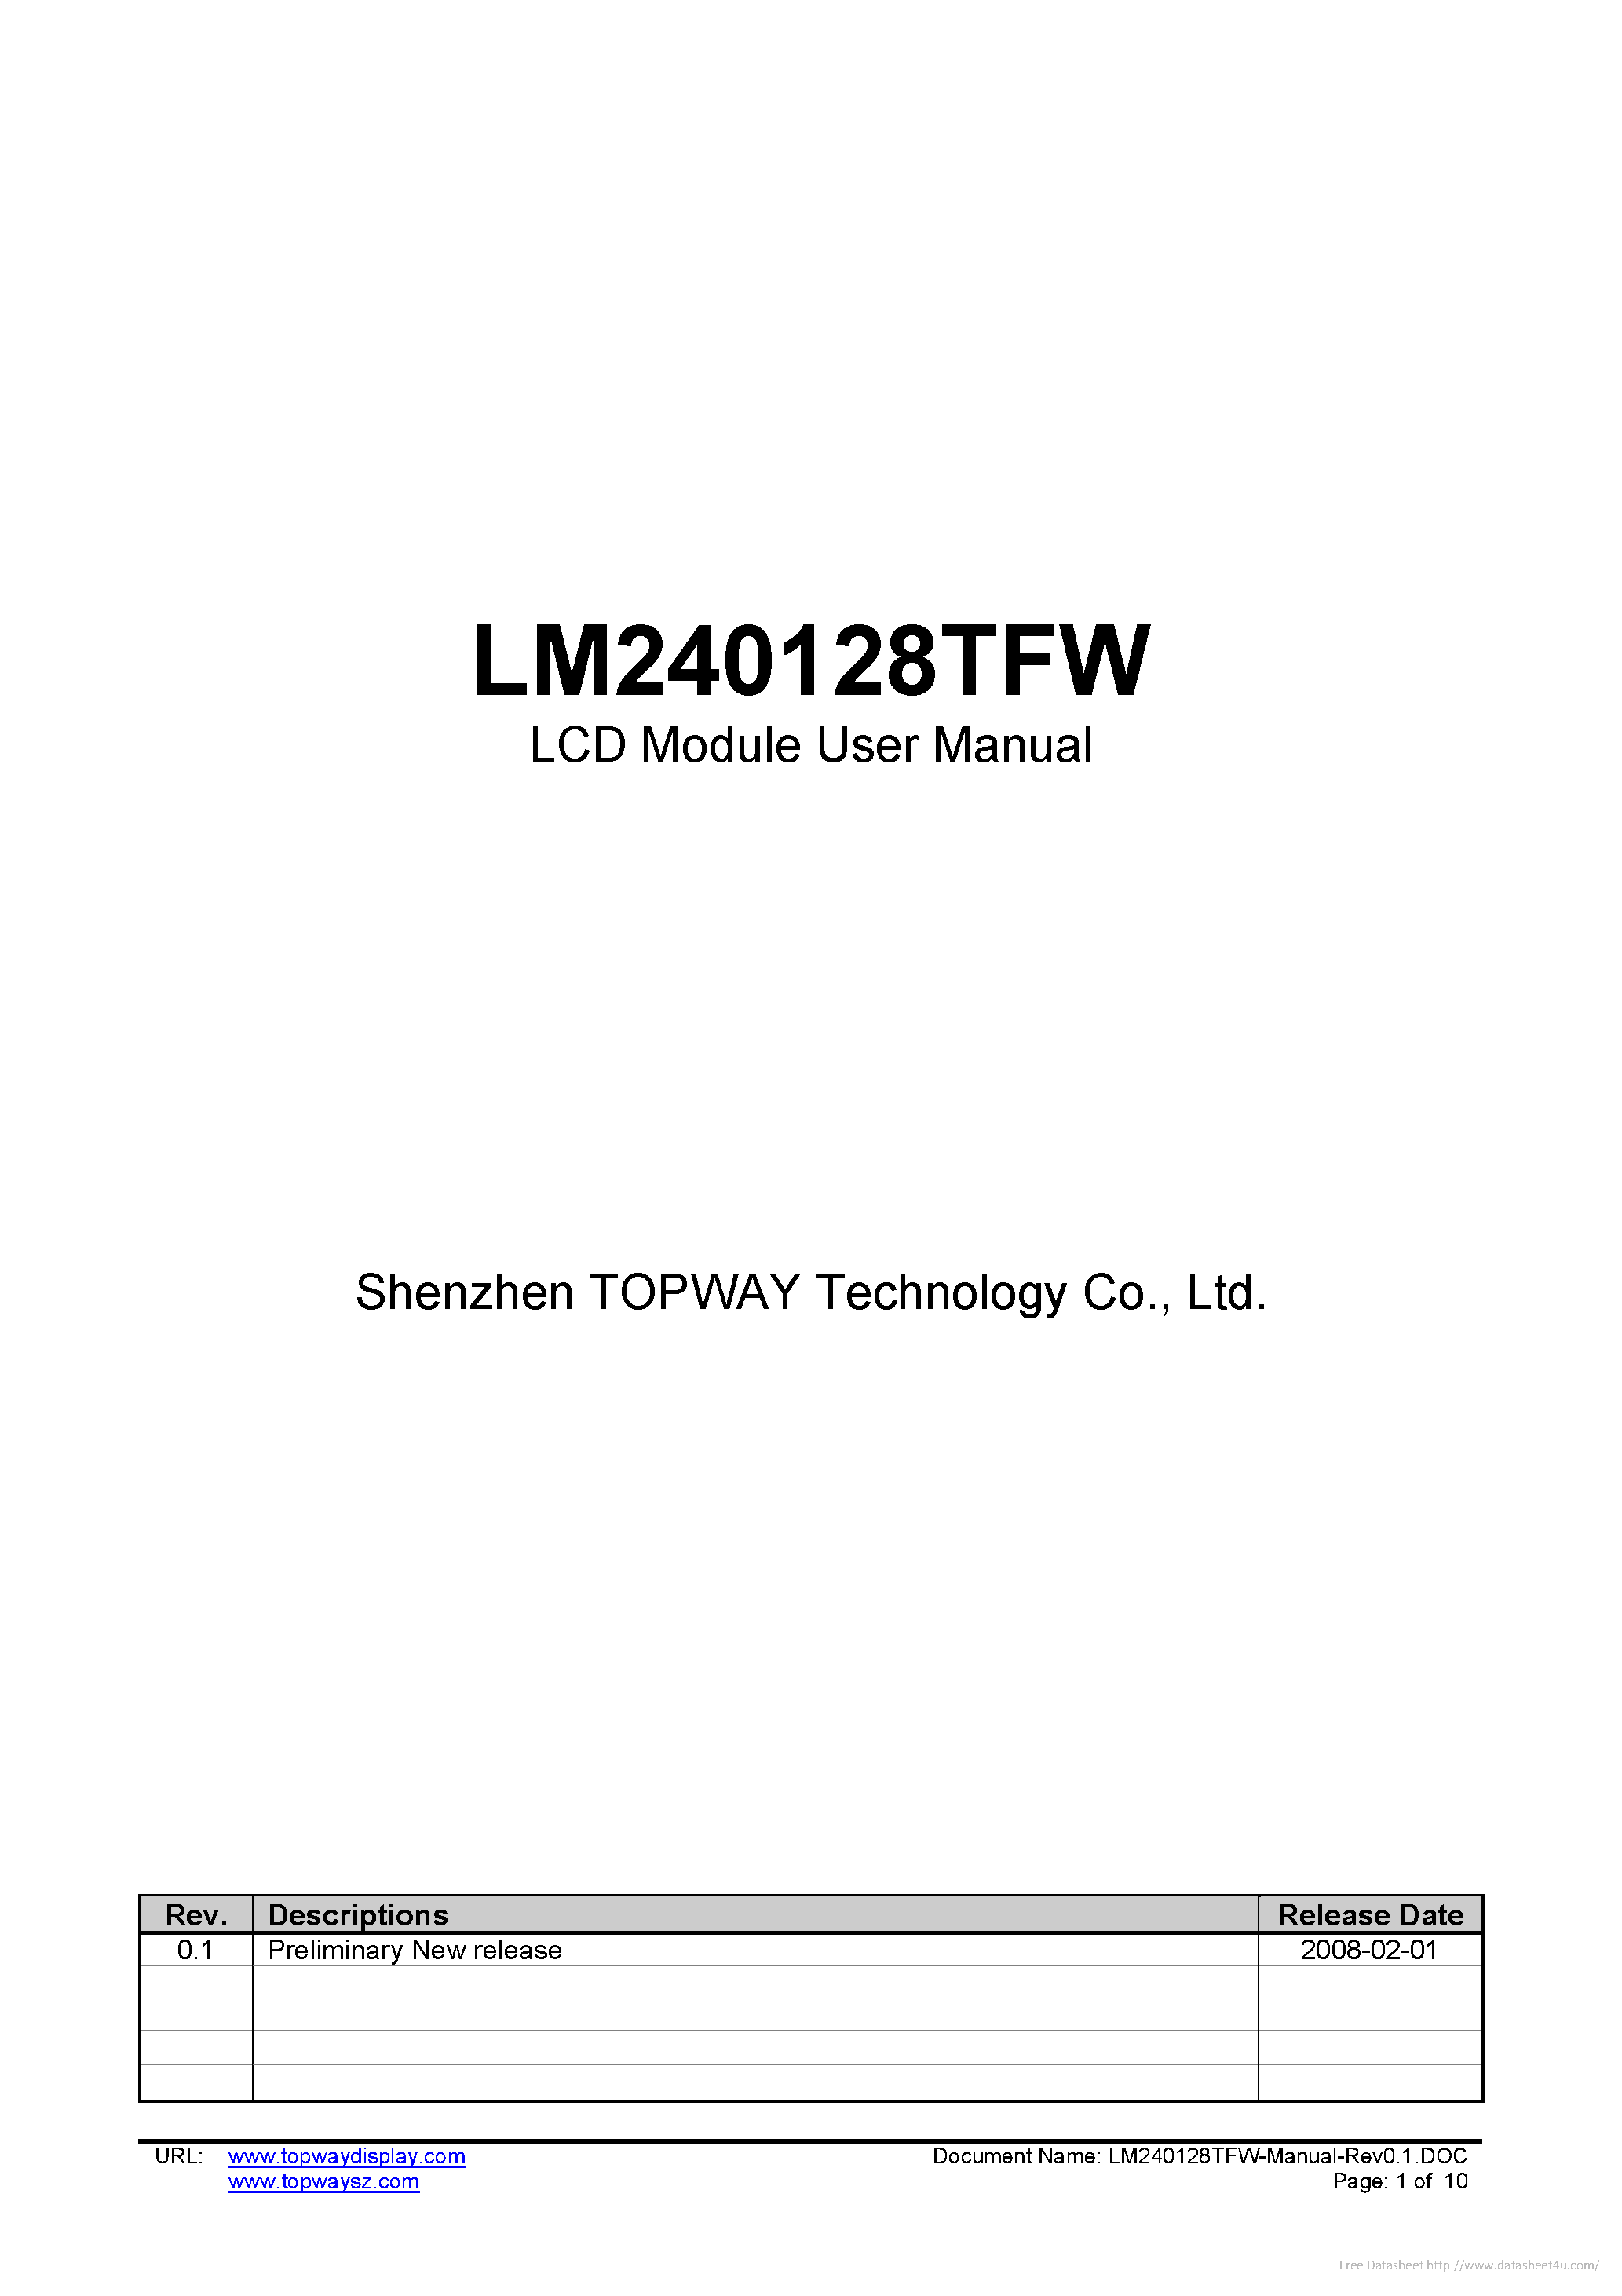 Datasheet LM240128TFW - page 1